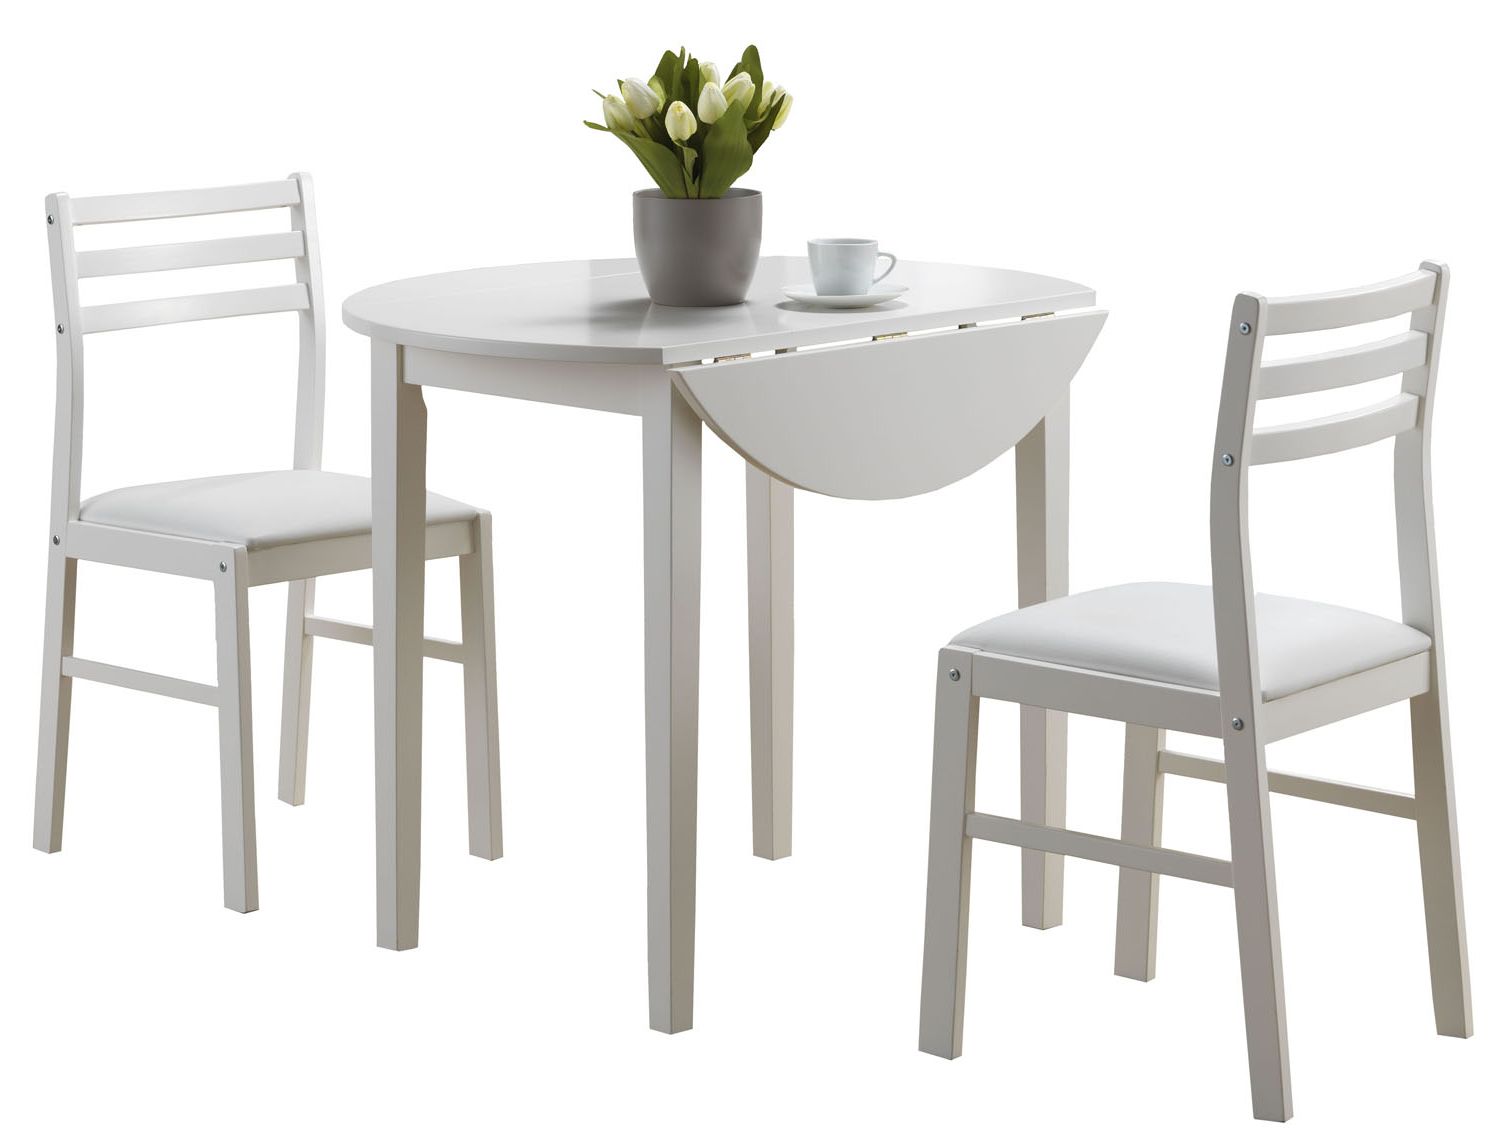 Preferred Only $233.33 Dining Set – 3 Pieces Set / White With A 36"dia Regarding Transitional 3 Piece Drop Leaf Casual Dining Tables Set (Photo 9 of 25)